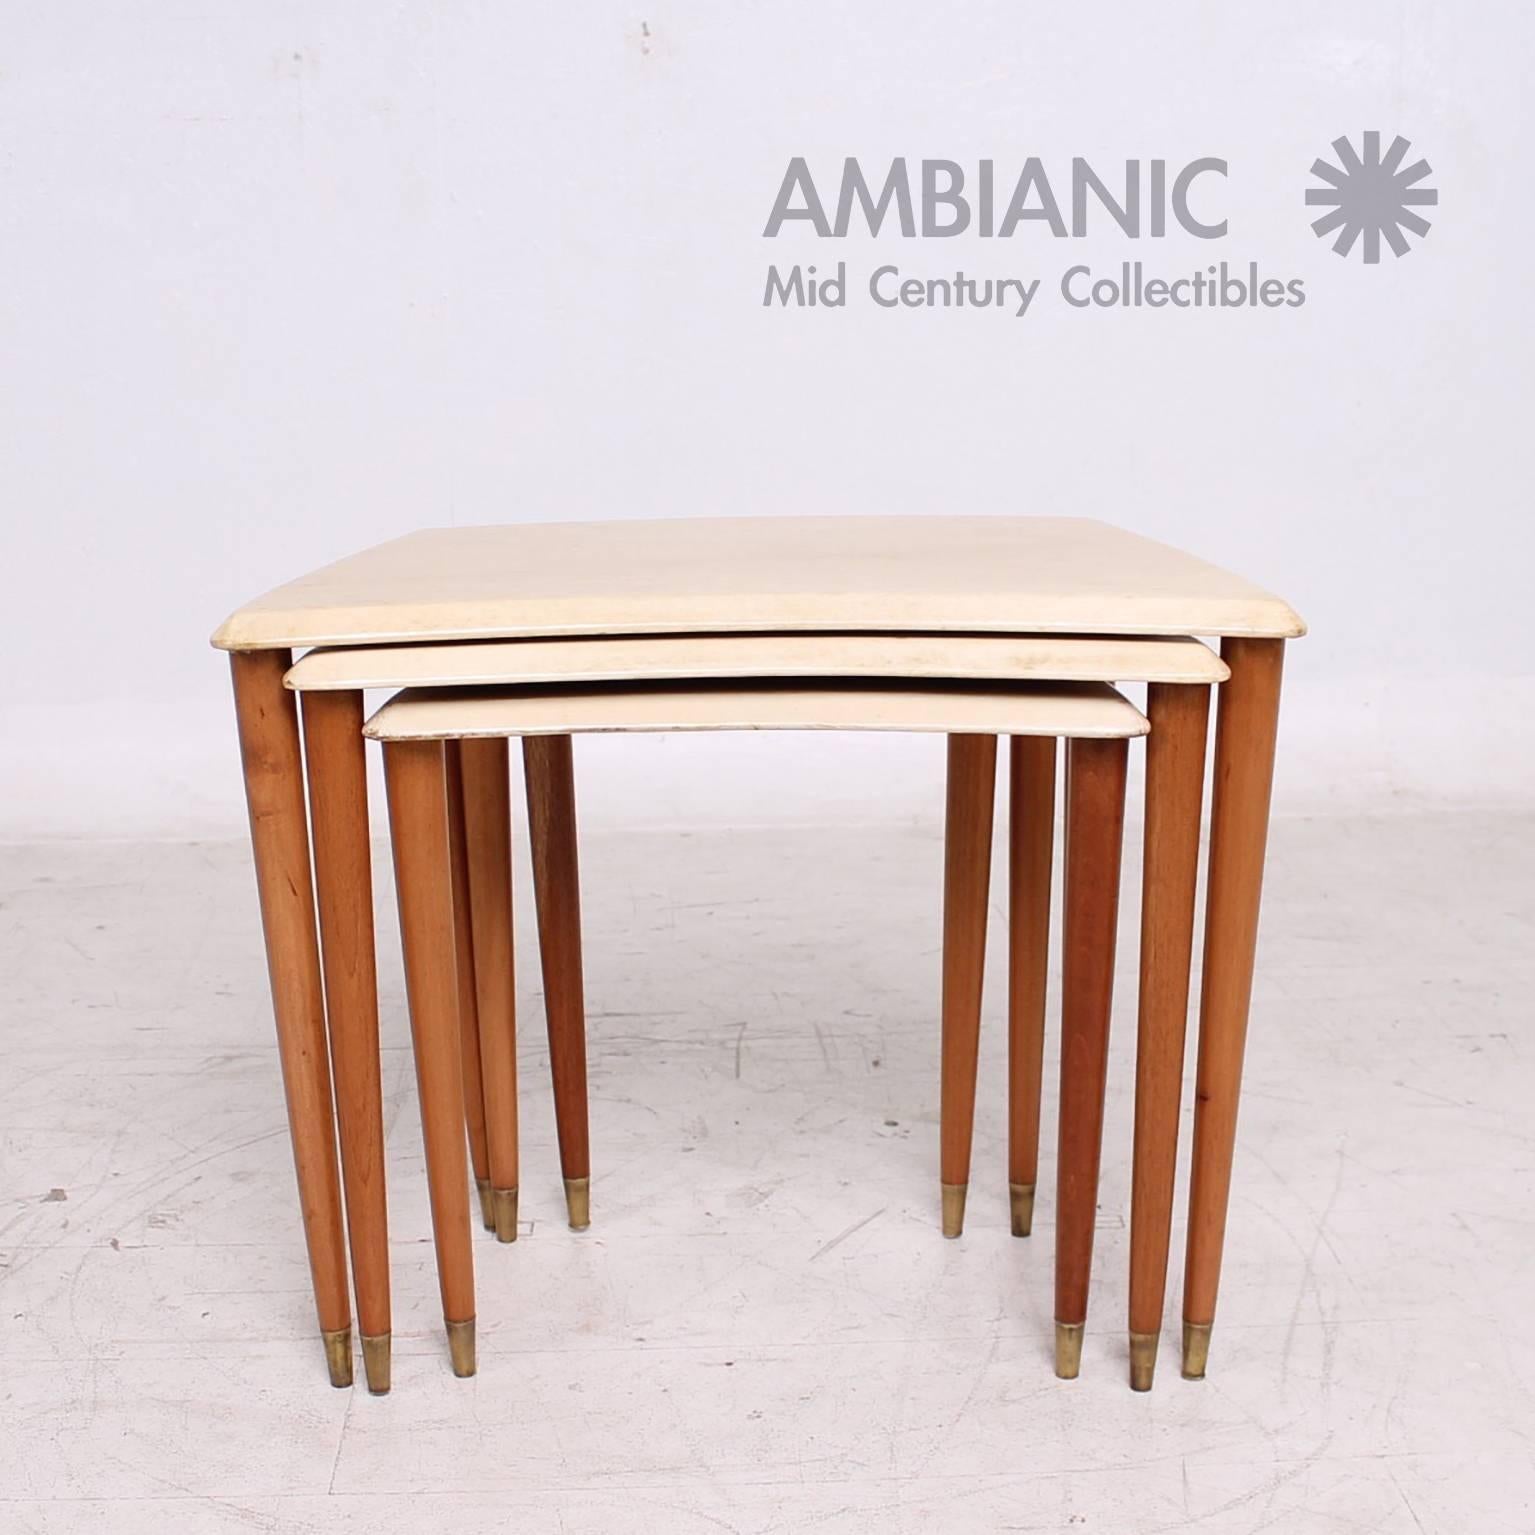 Unknown Mid-Century Modern Nesting Tables in Goatskin and Mahogany Wood